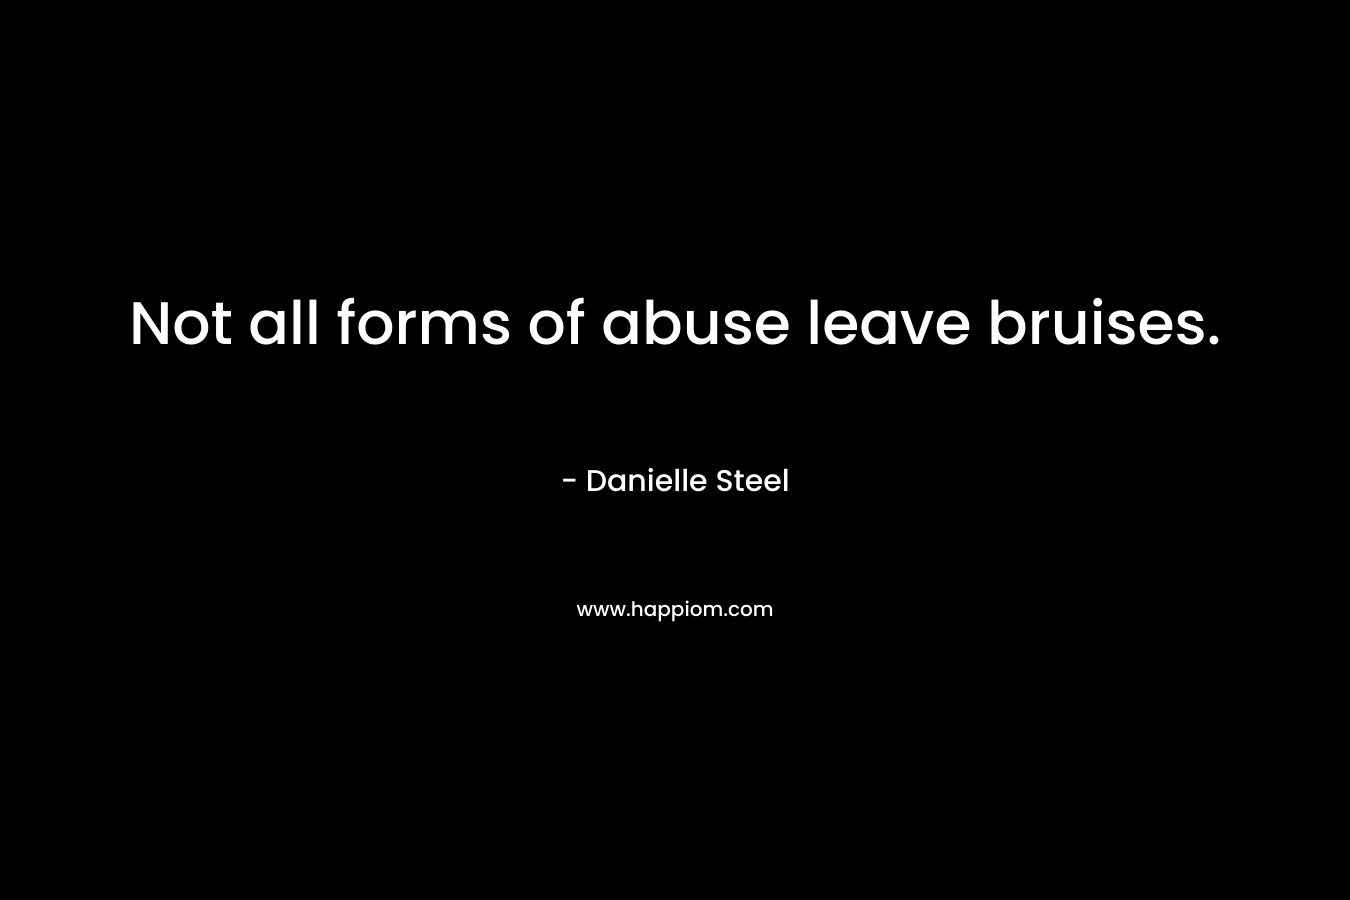 Not all forms of abuse leave bruises. – Danielle Steel